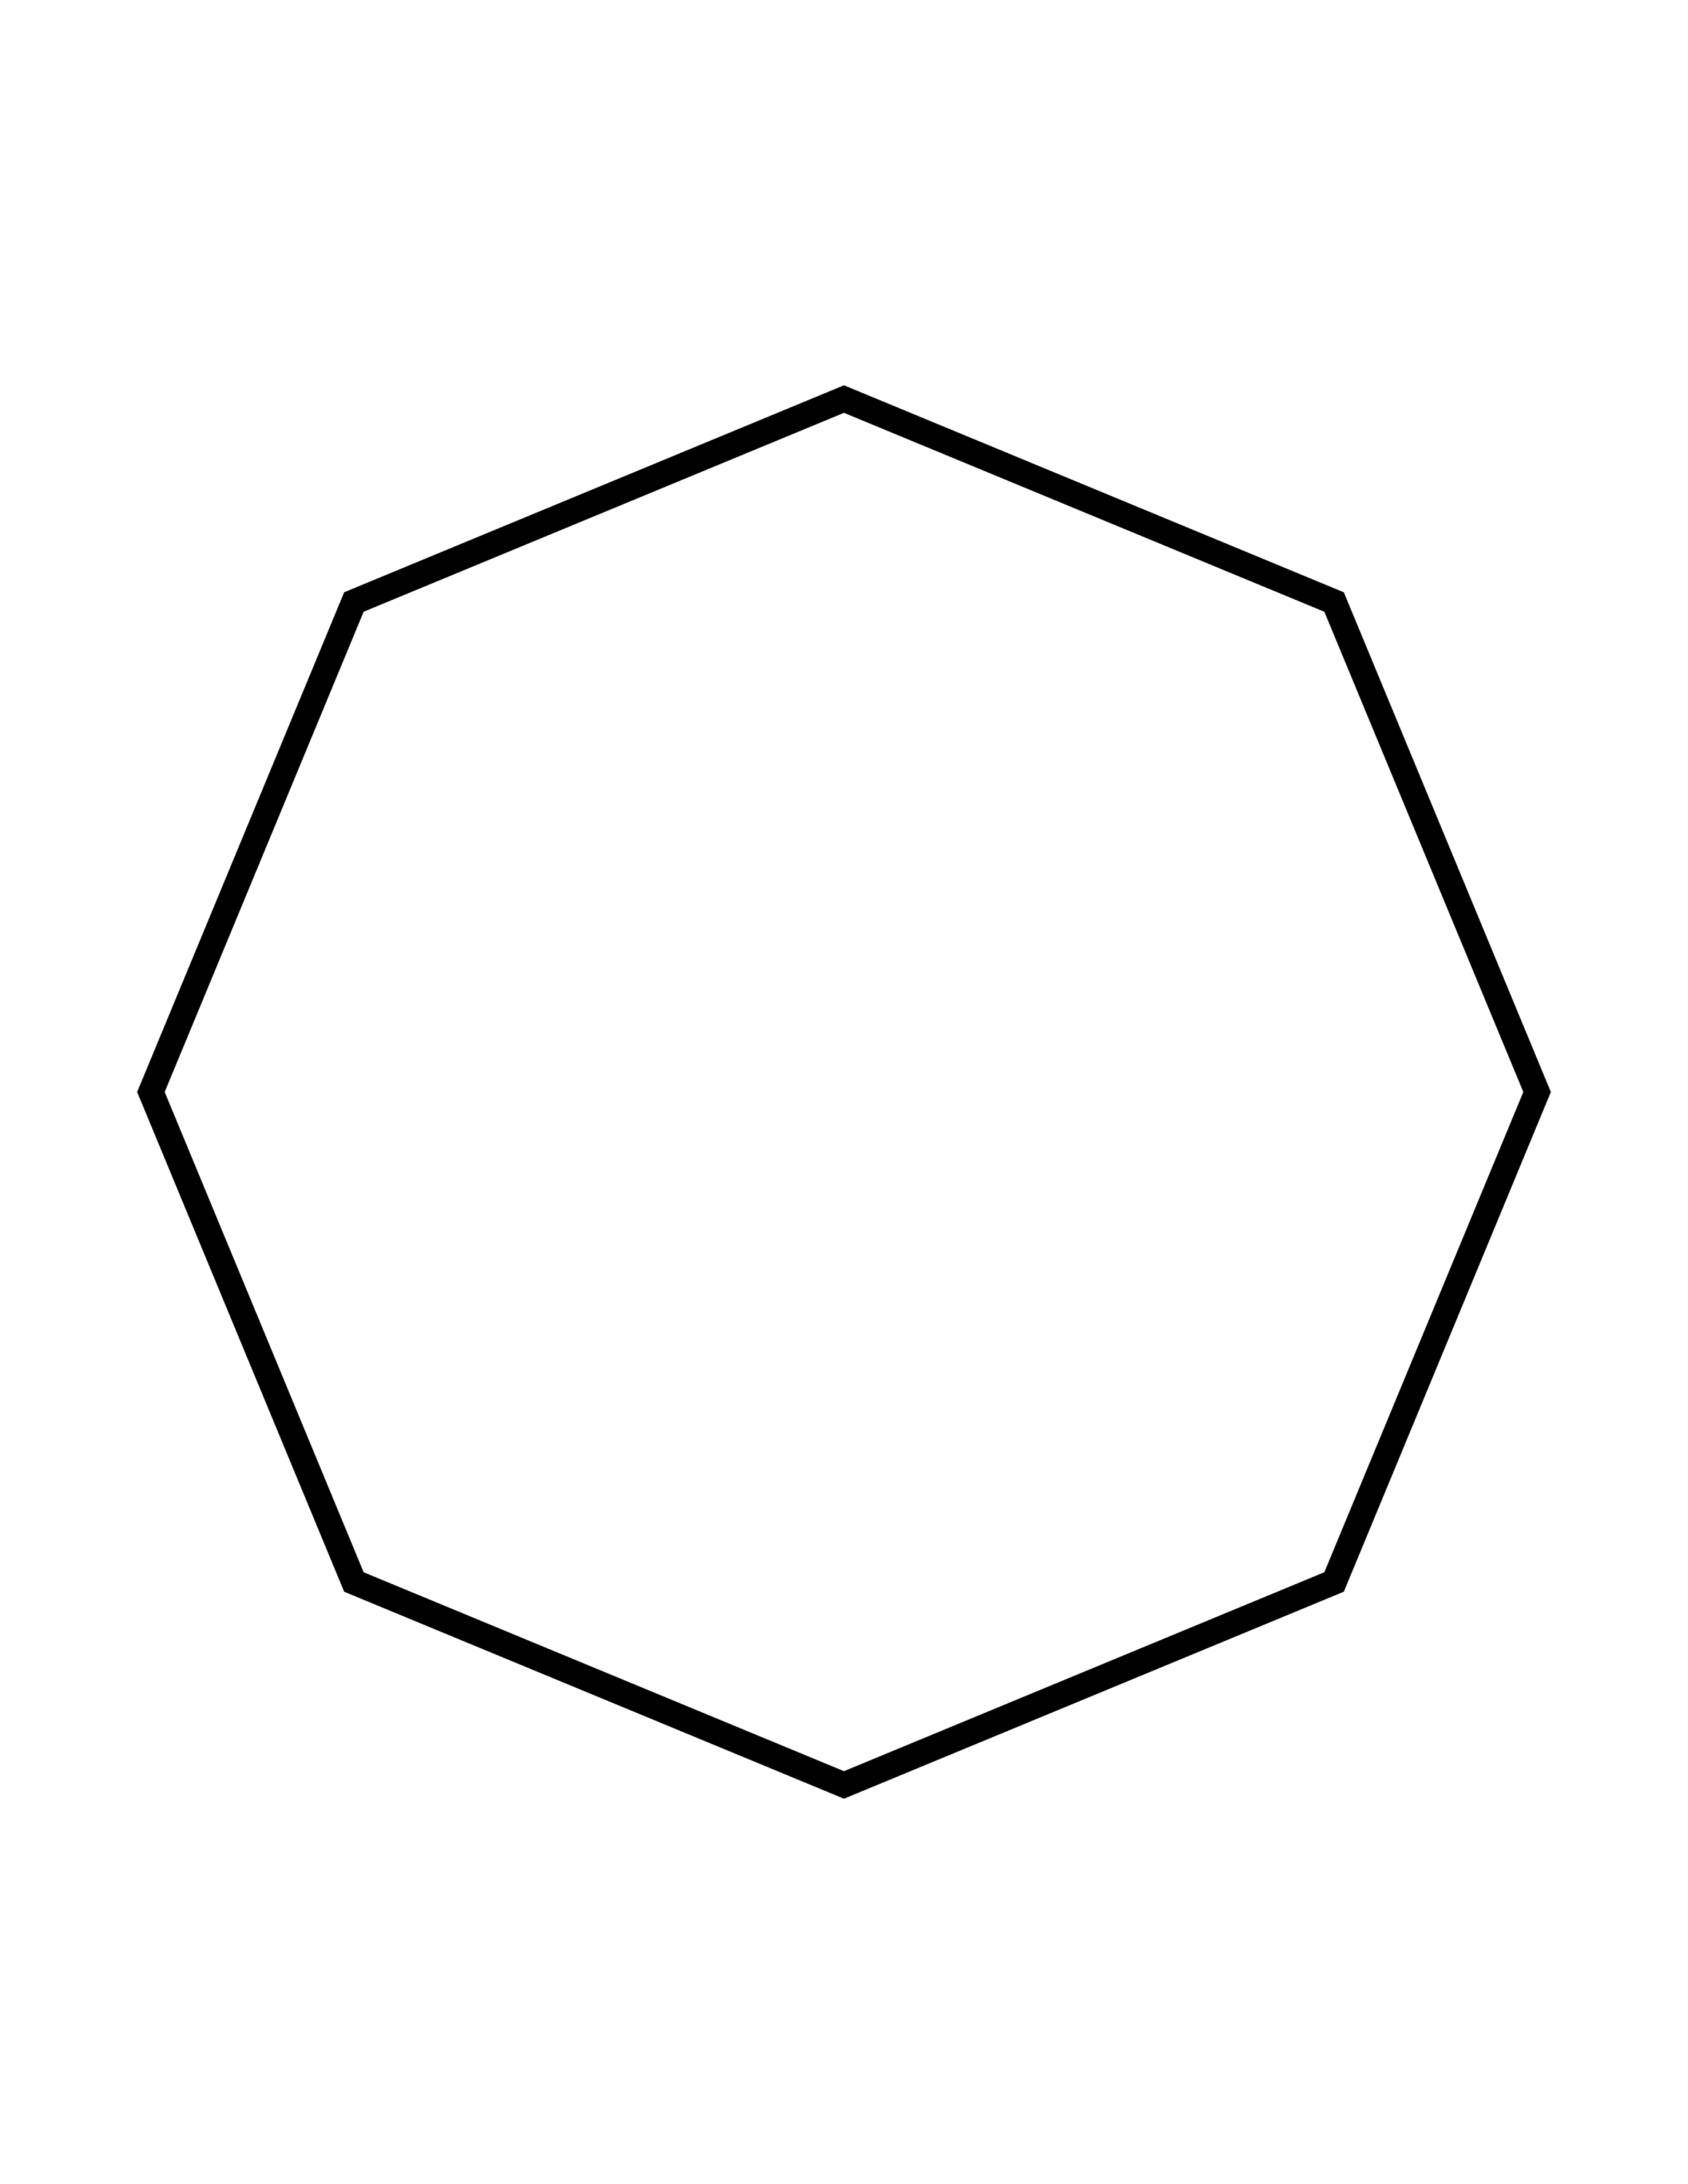 Flashcard of a polygon with eight equal sides | ClipArt ETC